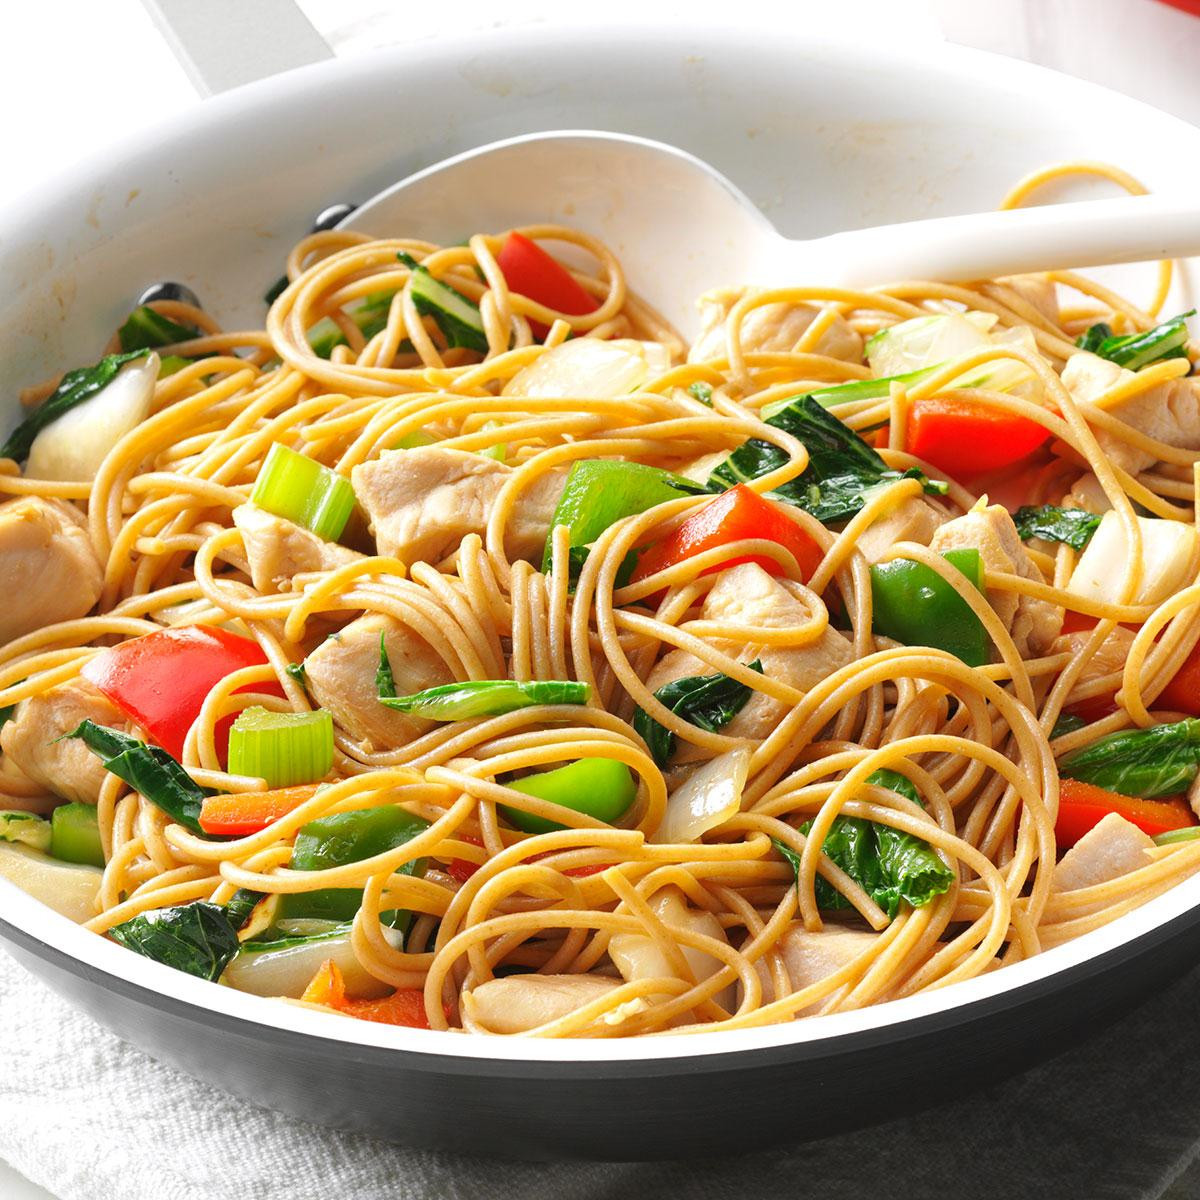 Chicken Stir Fry With Noodles
 Chicken Stir Fry with Noodles Recipe